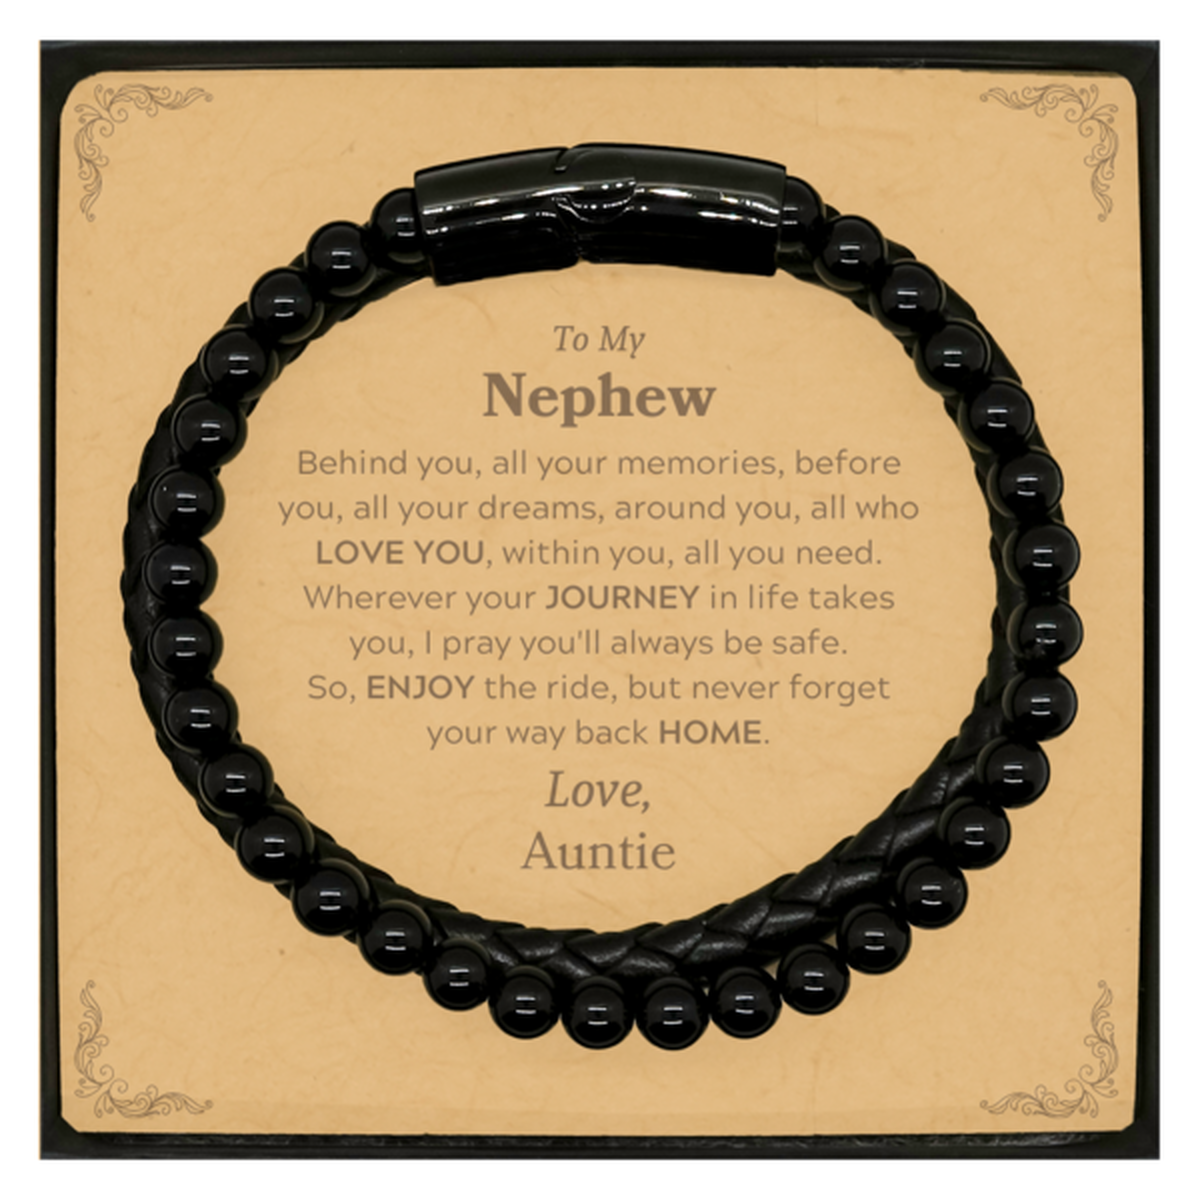 To My Nephew Graduation Gifts from Auntie, Nephew Stone Leather Bracelets Christmas Birthday Gifts for Nephew Behind you, all your memories, before you, all your dreams. Love, Auntie